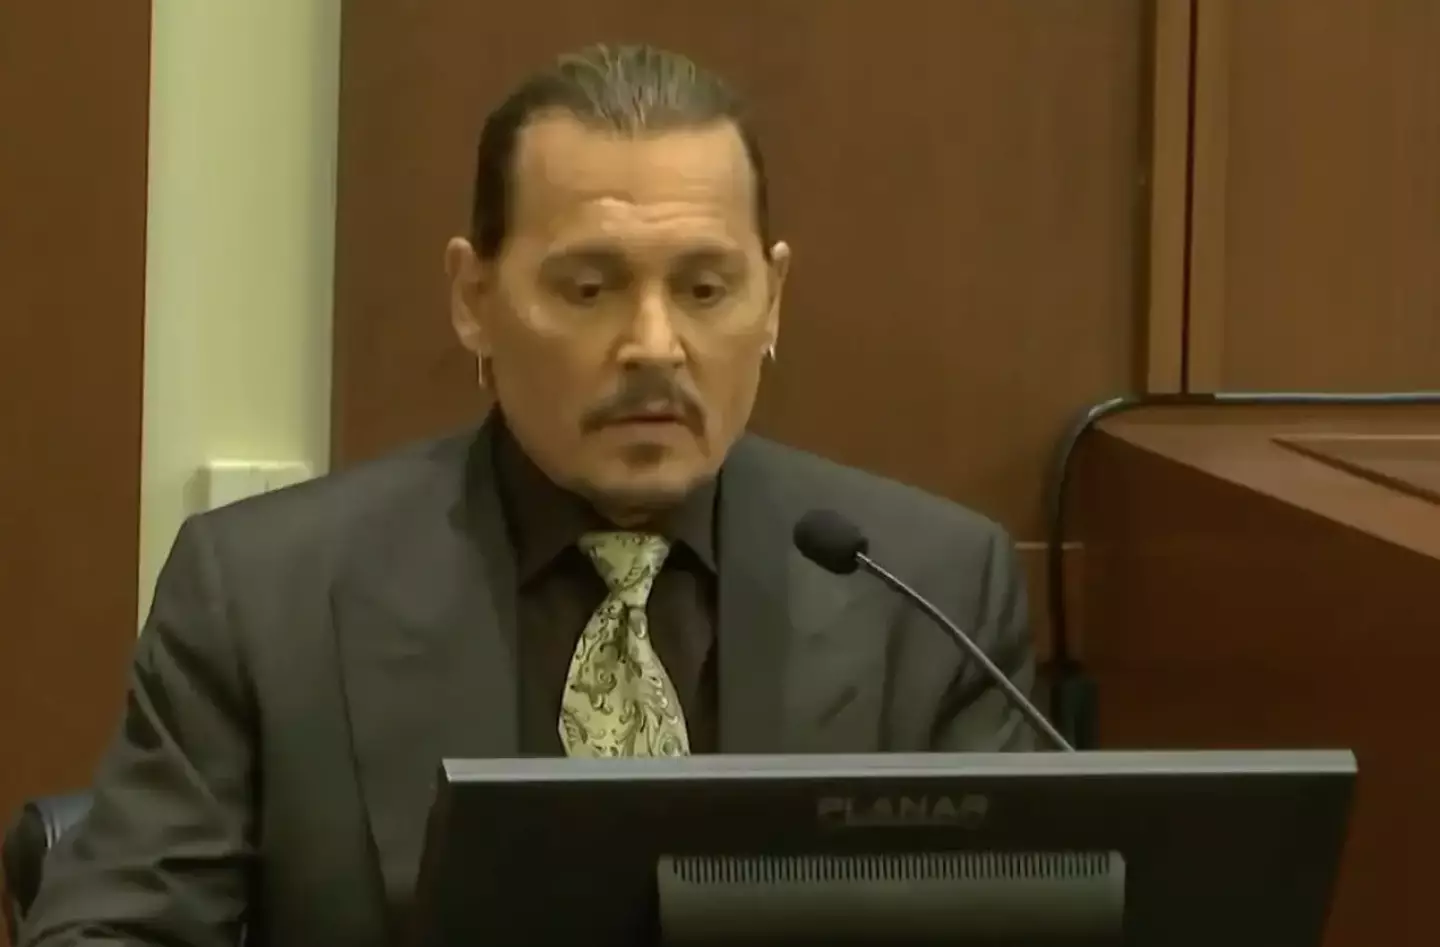 Depp took to the stand and recounted his upbringing.